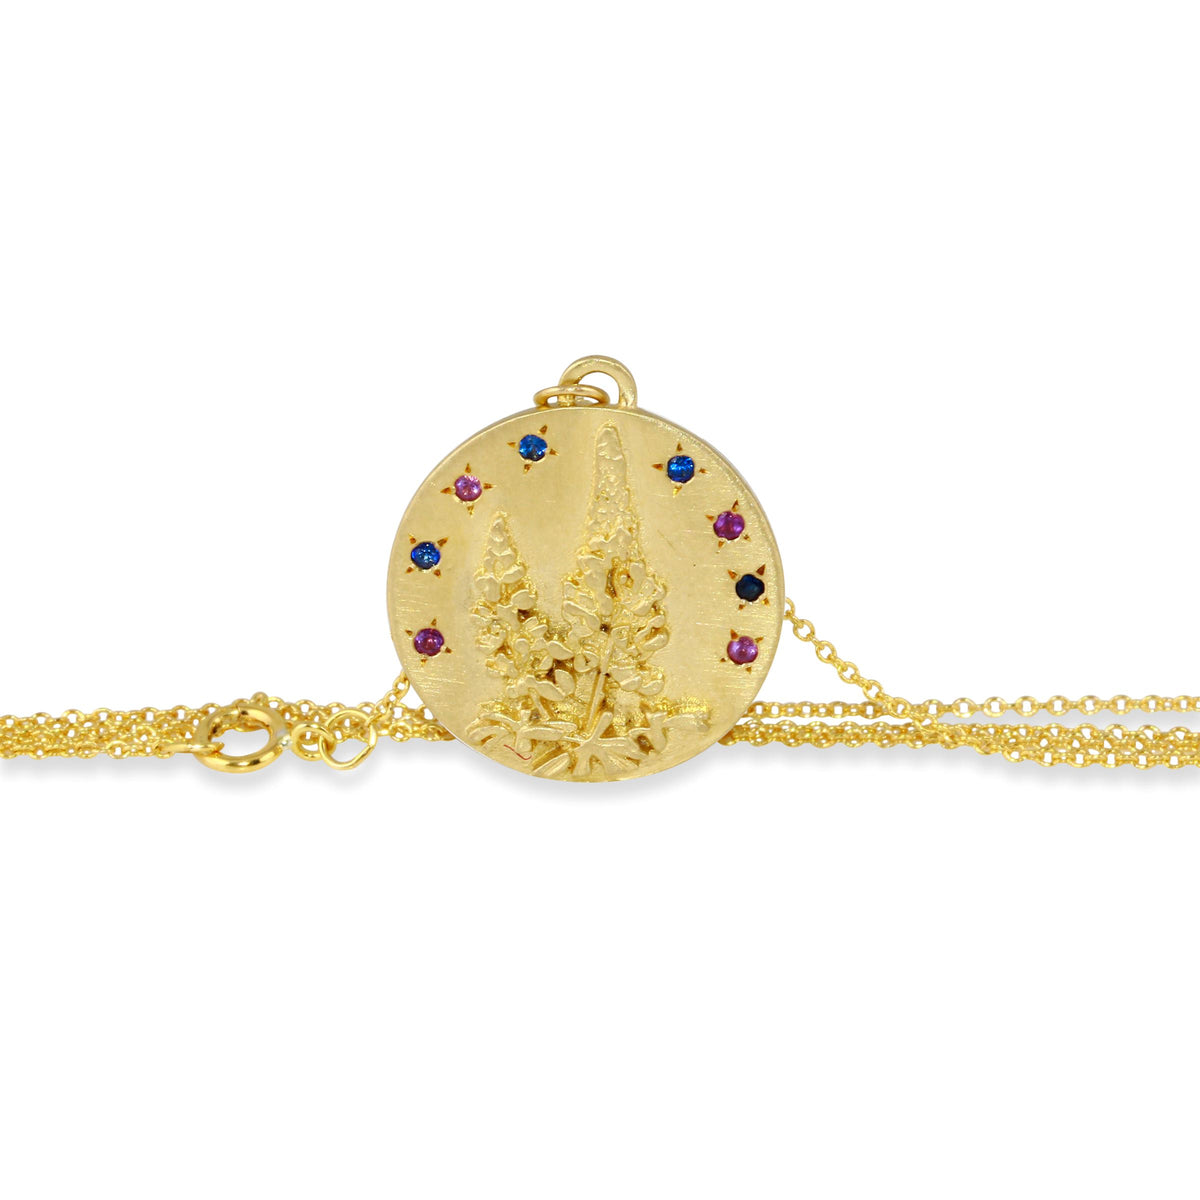 Lupine Flower Amethyst and Sapphire Necklace - 14k gold | Talisman Collection necklace Amanda K Lockrow